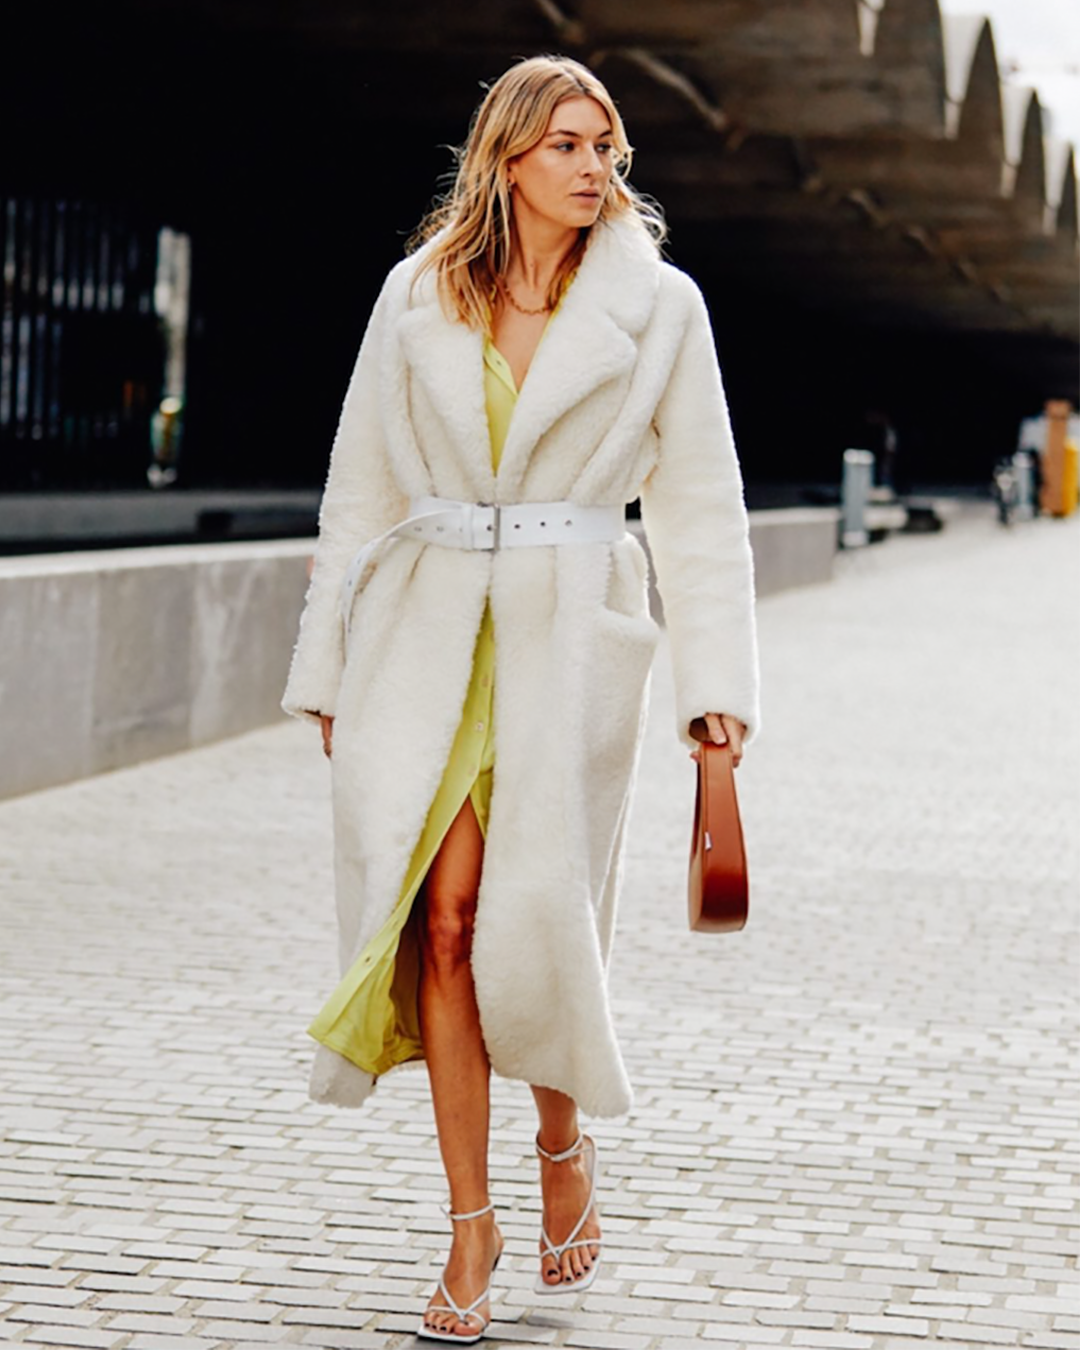 CAMILLE CHARRIERE IN CL LOVE